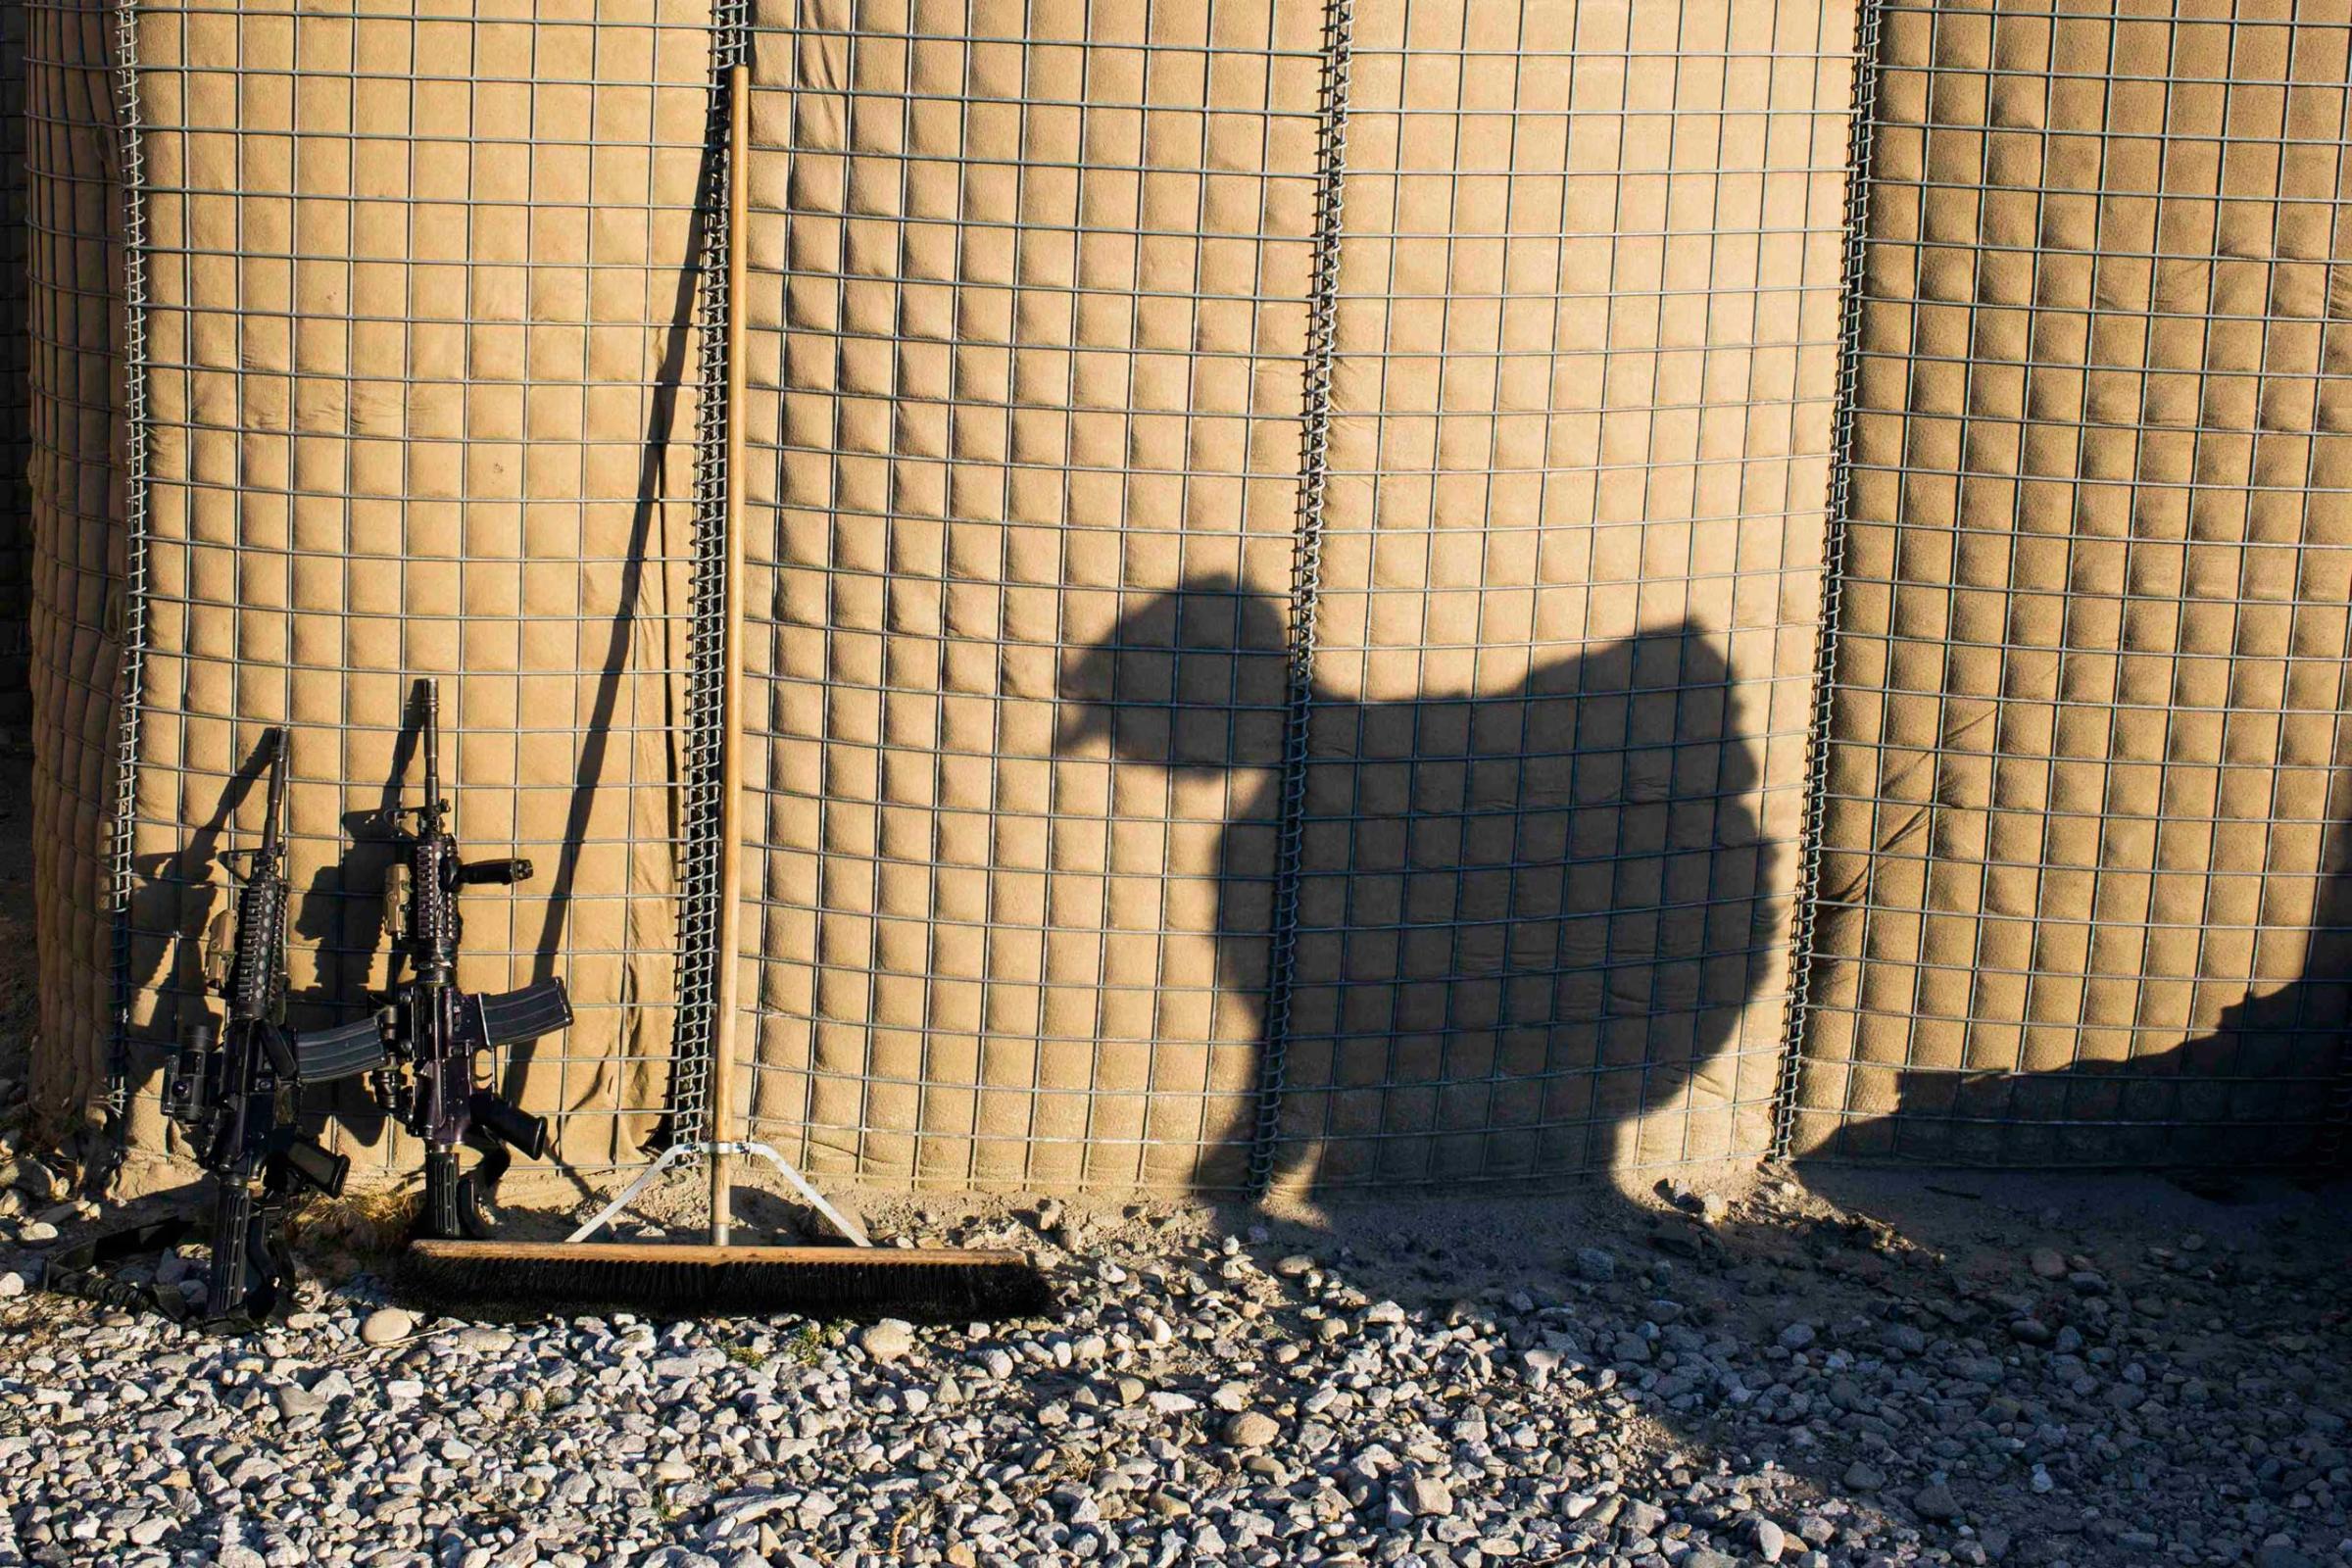 A U.S. soldier carries a backpack to a shipping container during preparations for leaving Afghanistan